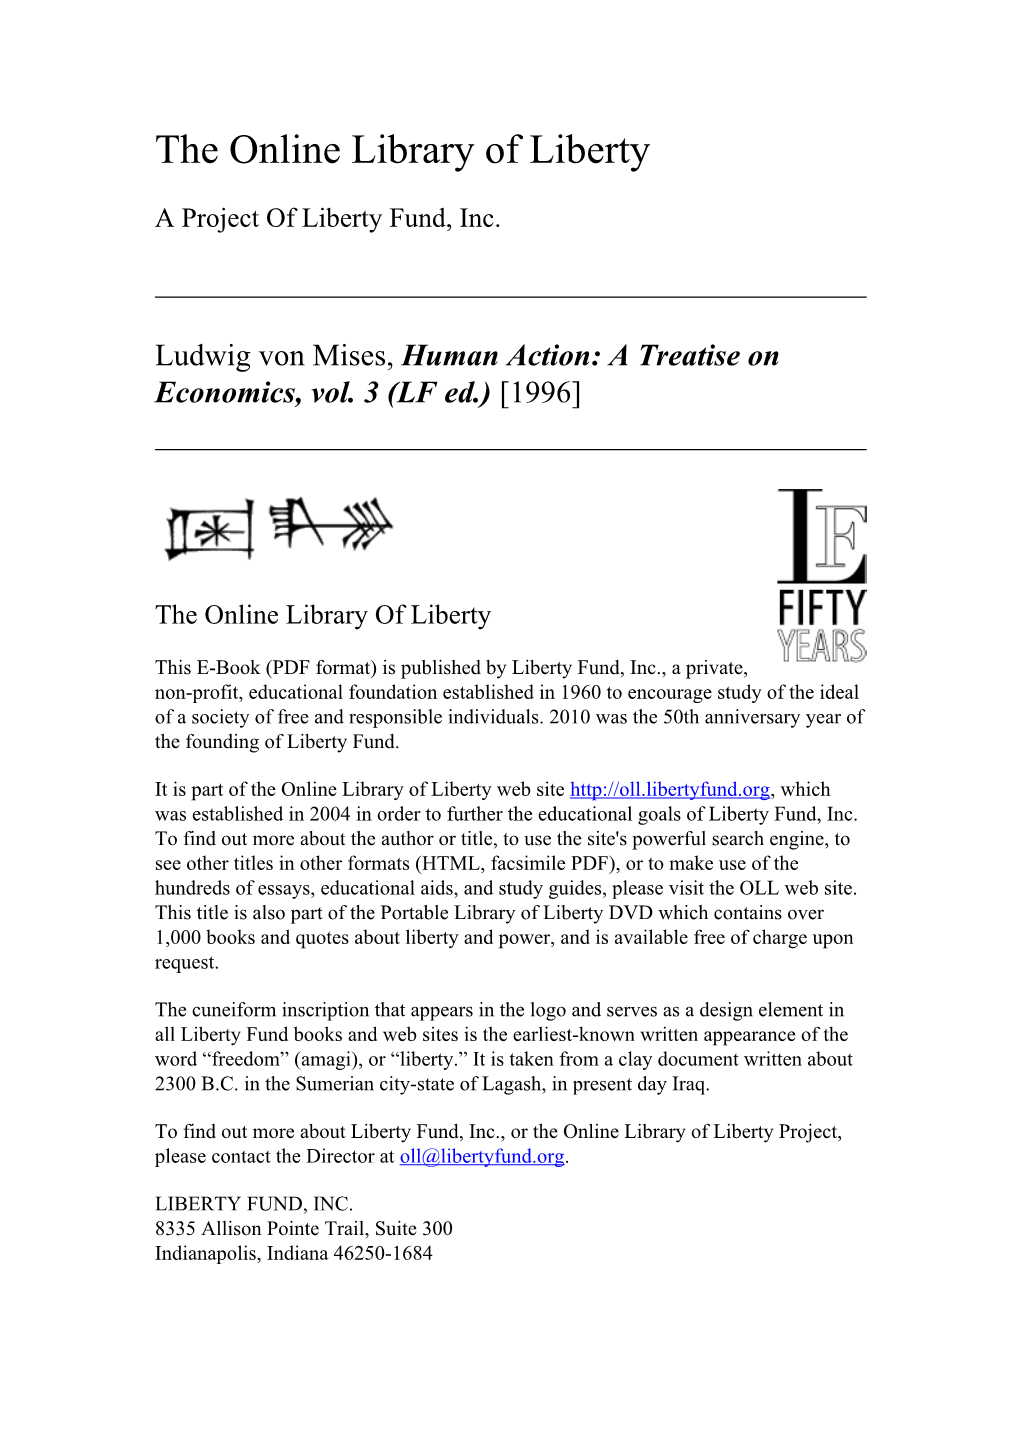 Online Library of Liberty: Human Action: a Treatise on Economics, Vol